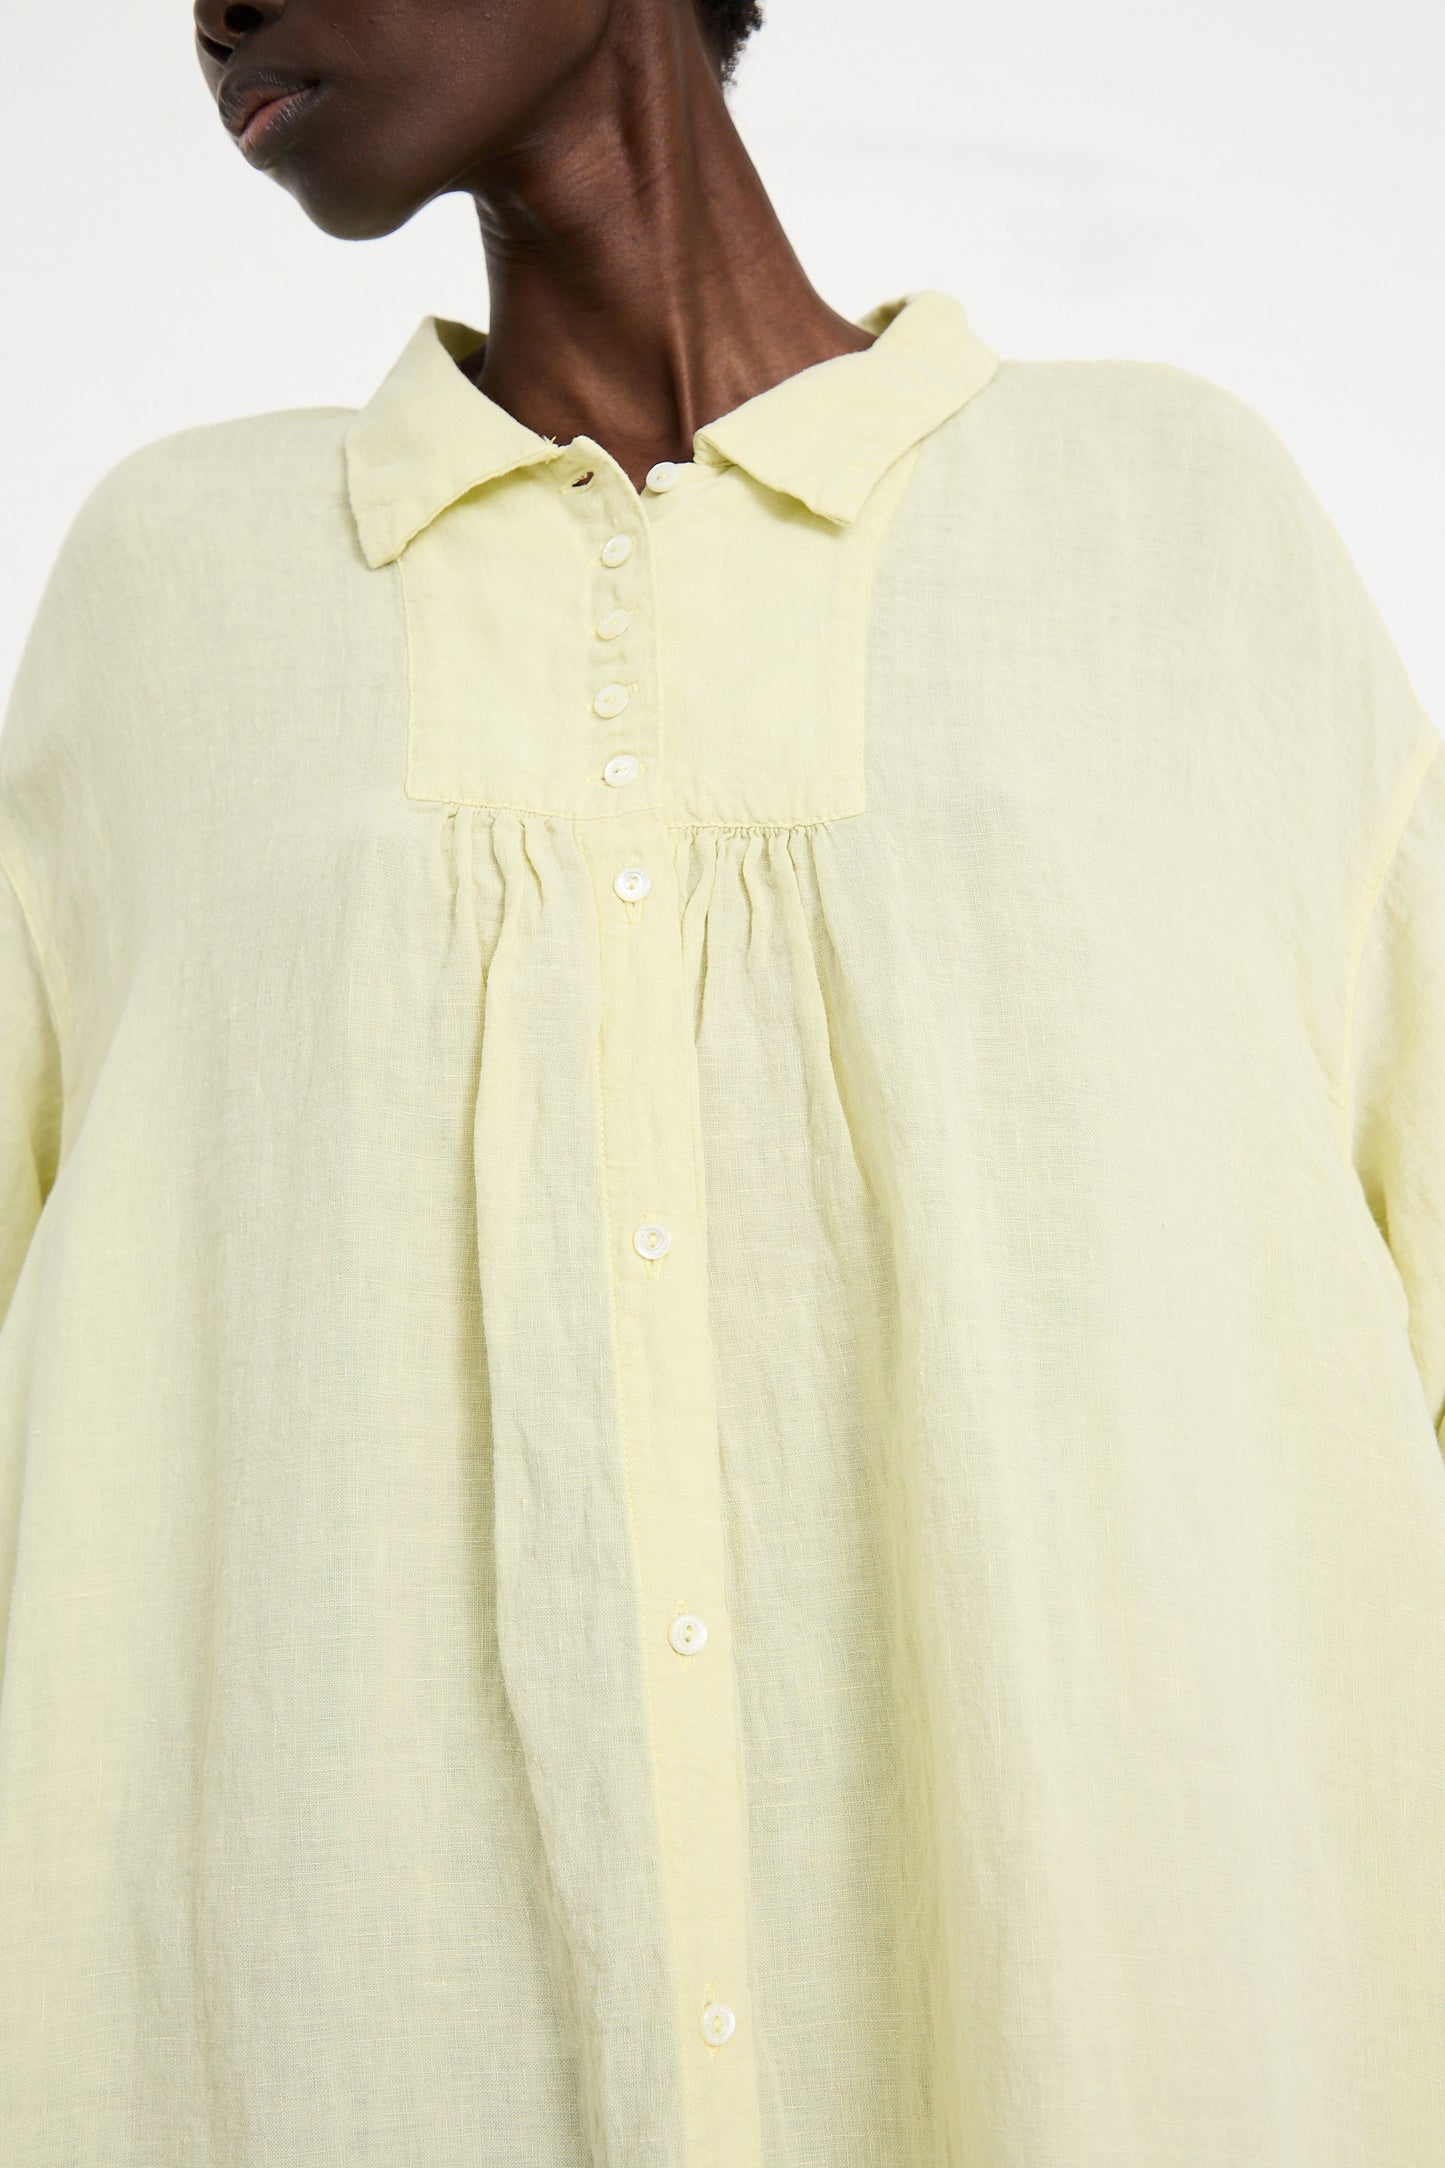 Close-up of a person wearing a Linen Omi-Zarashi Shirt Dress in Lemon by nest Robe with a collar and gathered details below the yoke. The focus is on the shirt's design.